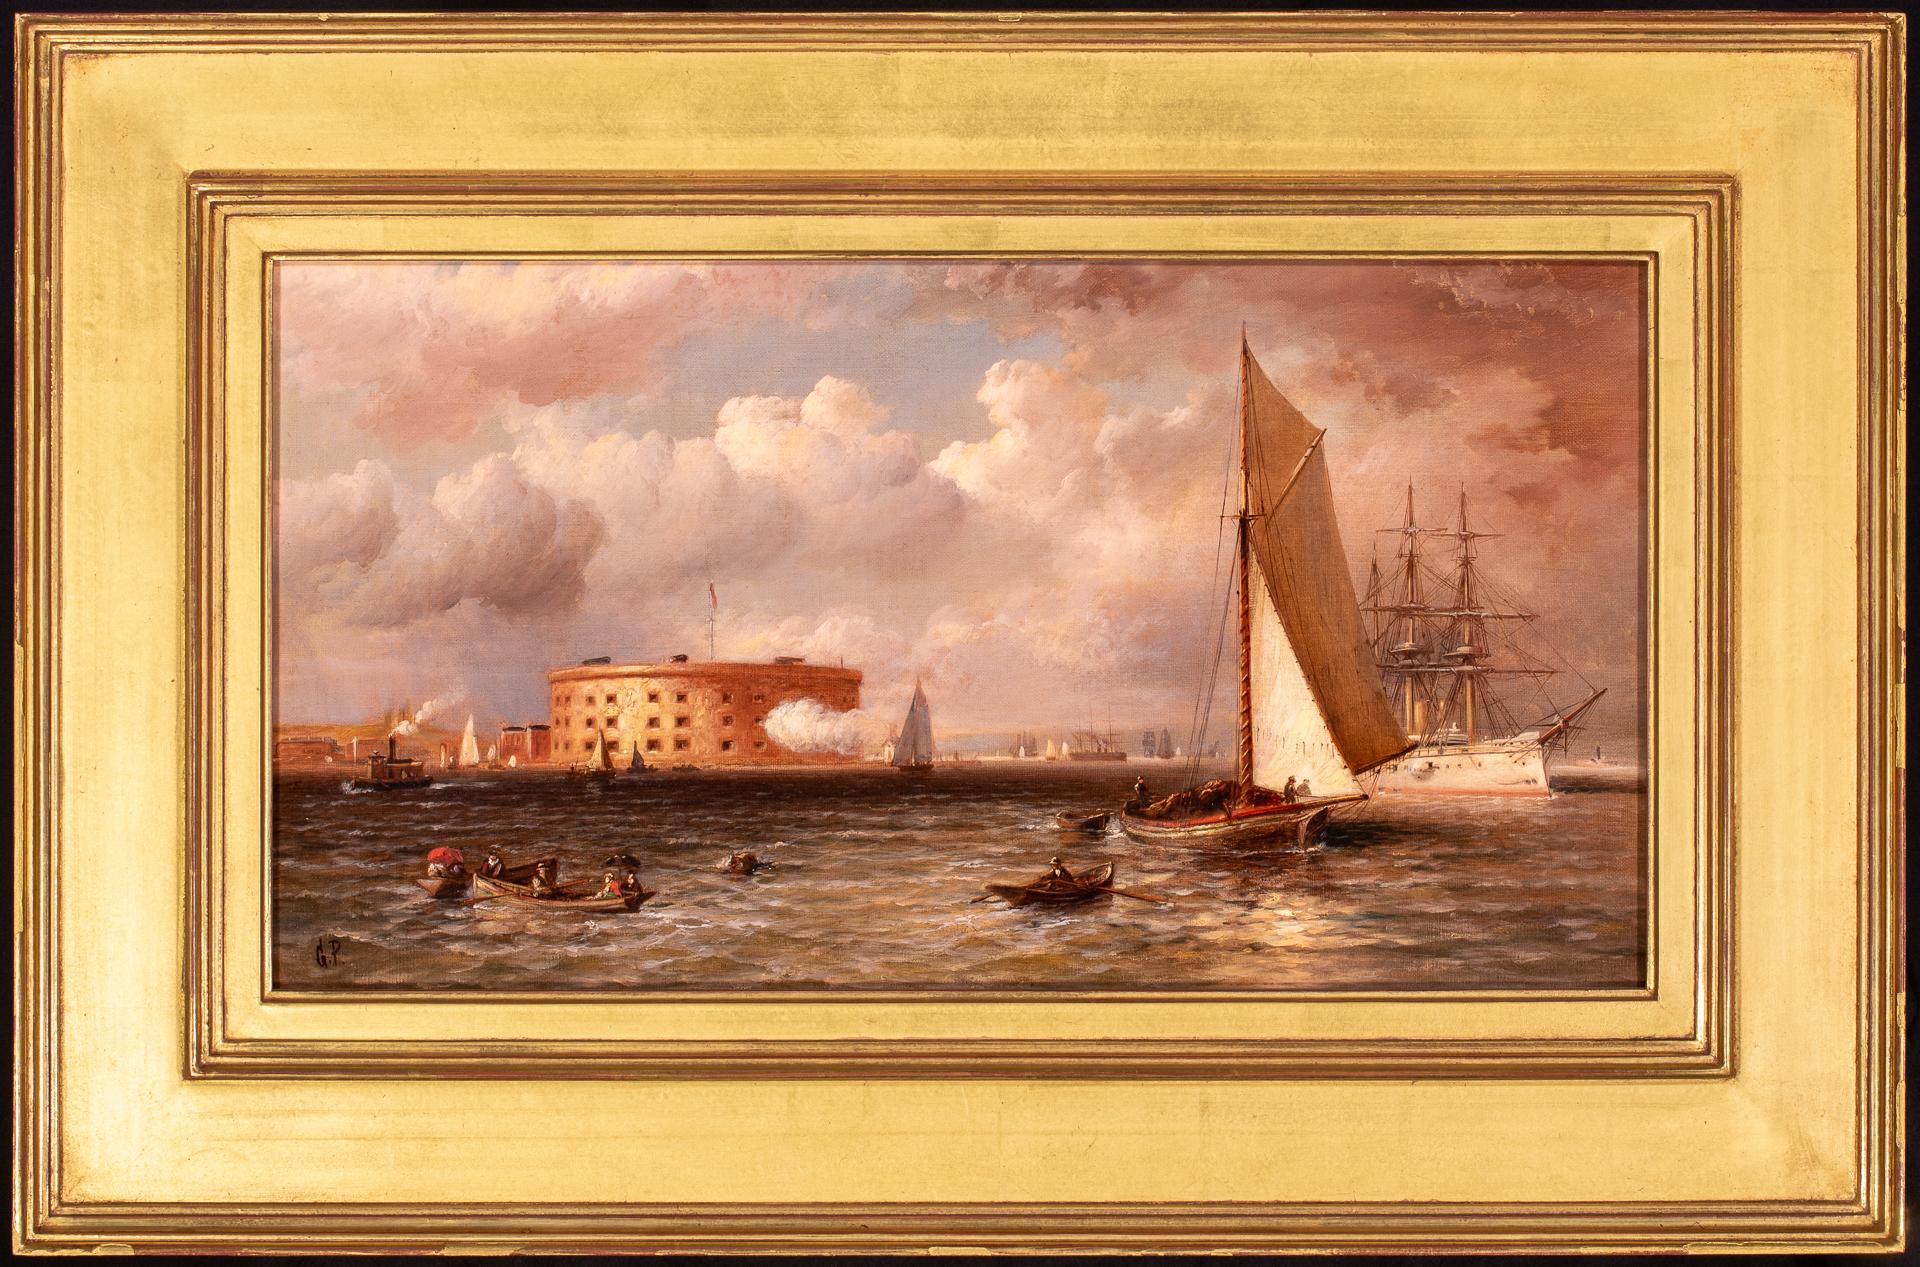 USS CHICAGO Off Castle Williams and Governor's Island, New York Harbor - Painting by Granville Perkins